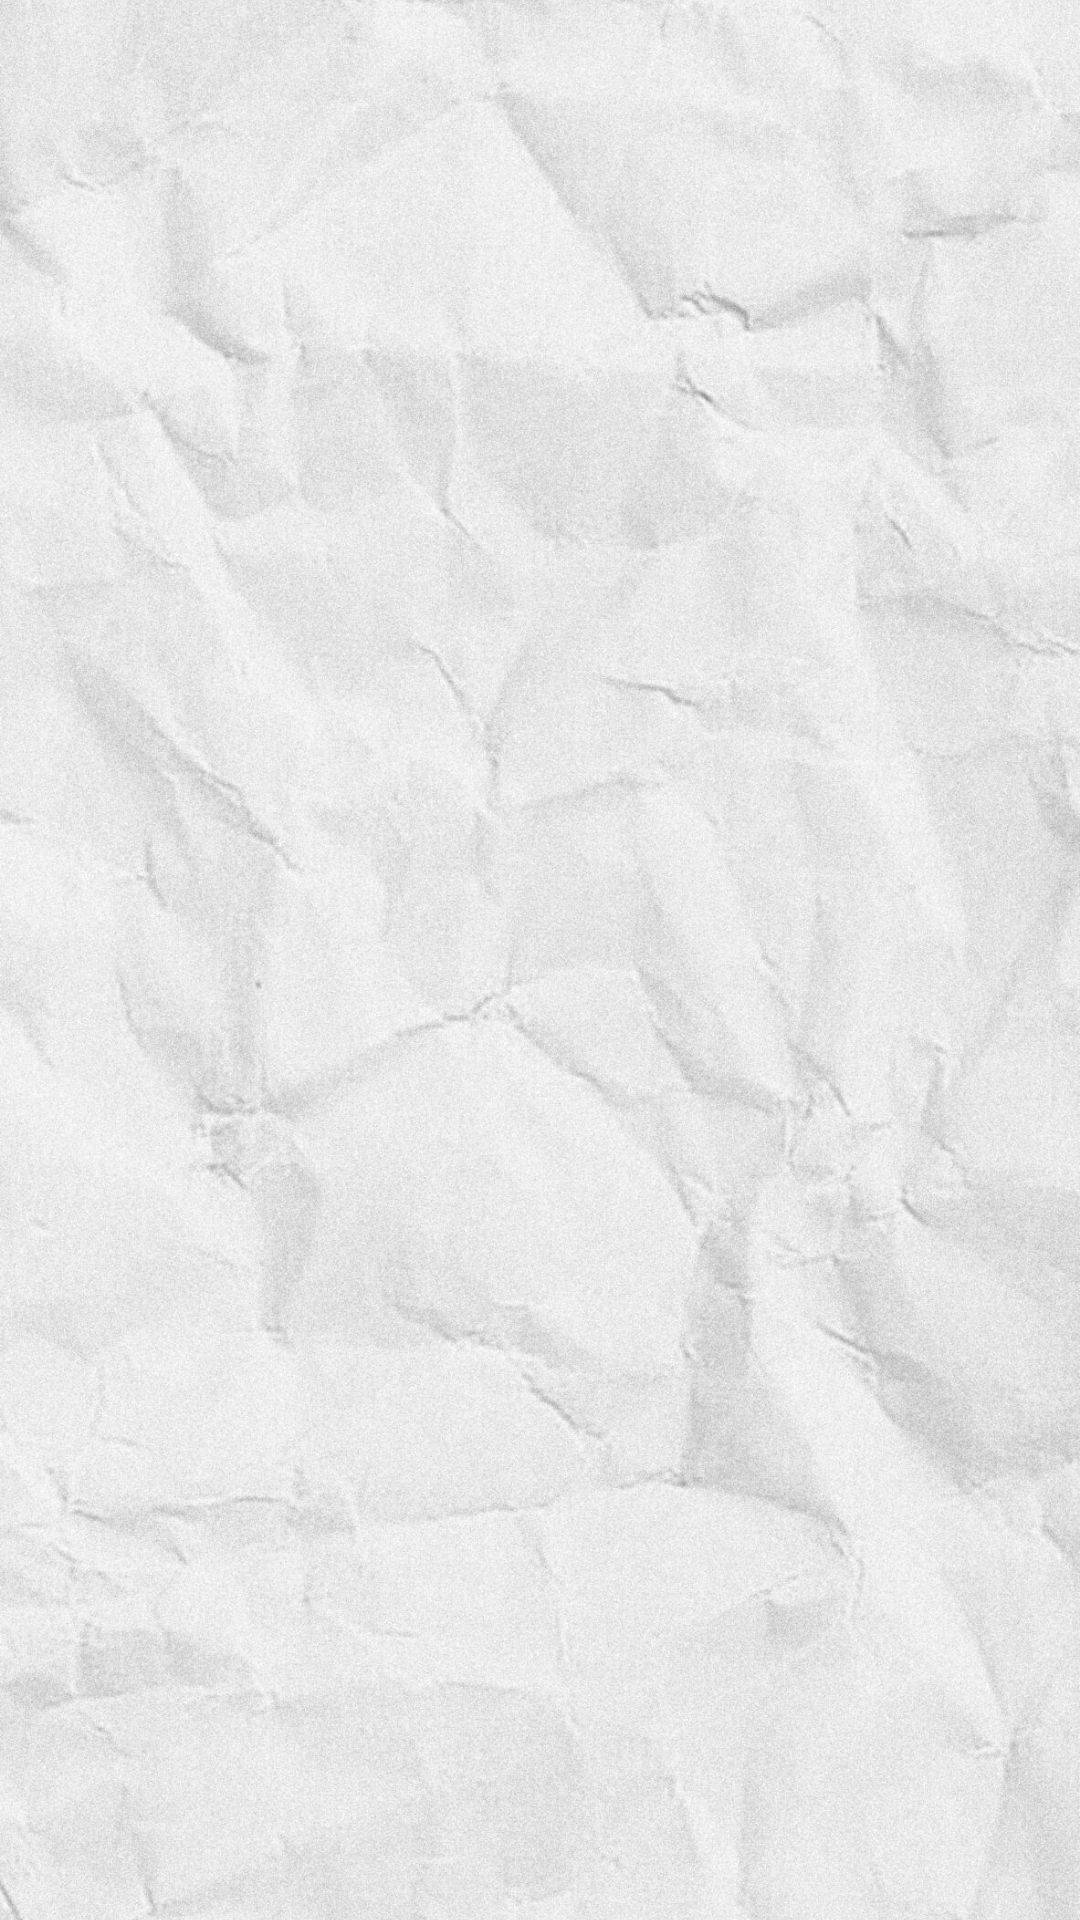 Crumpled Aesthetic White Paper Picture